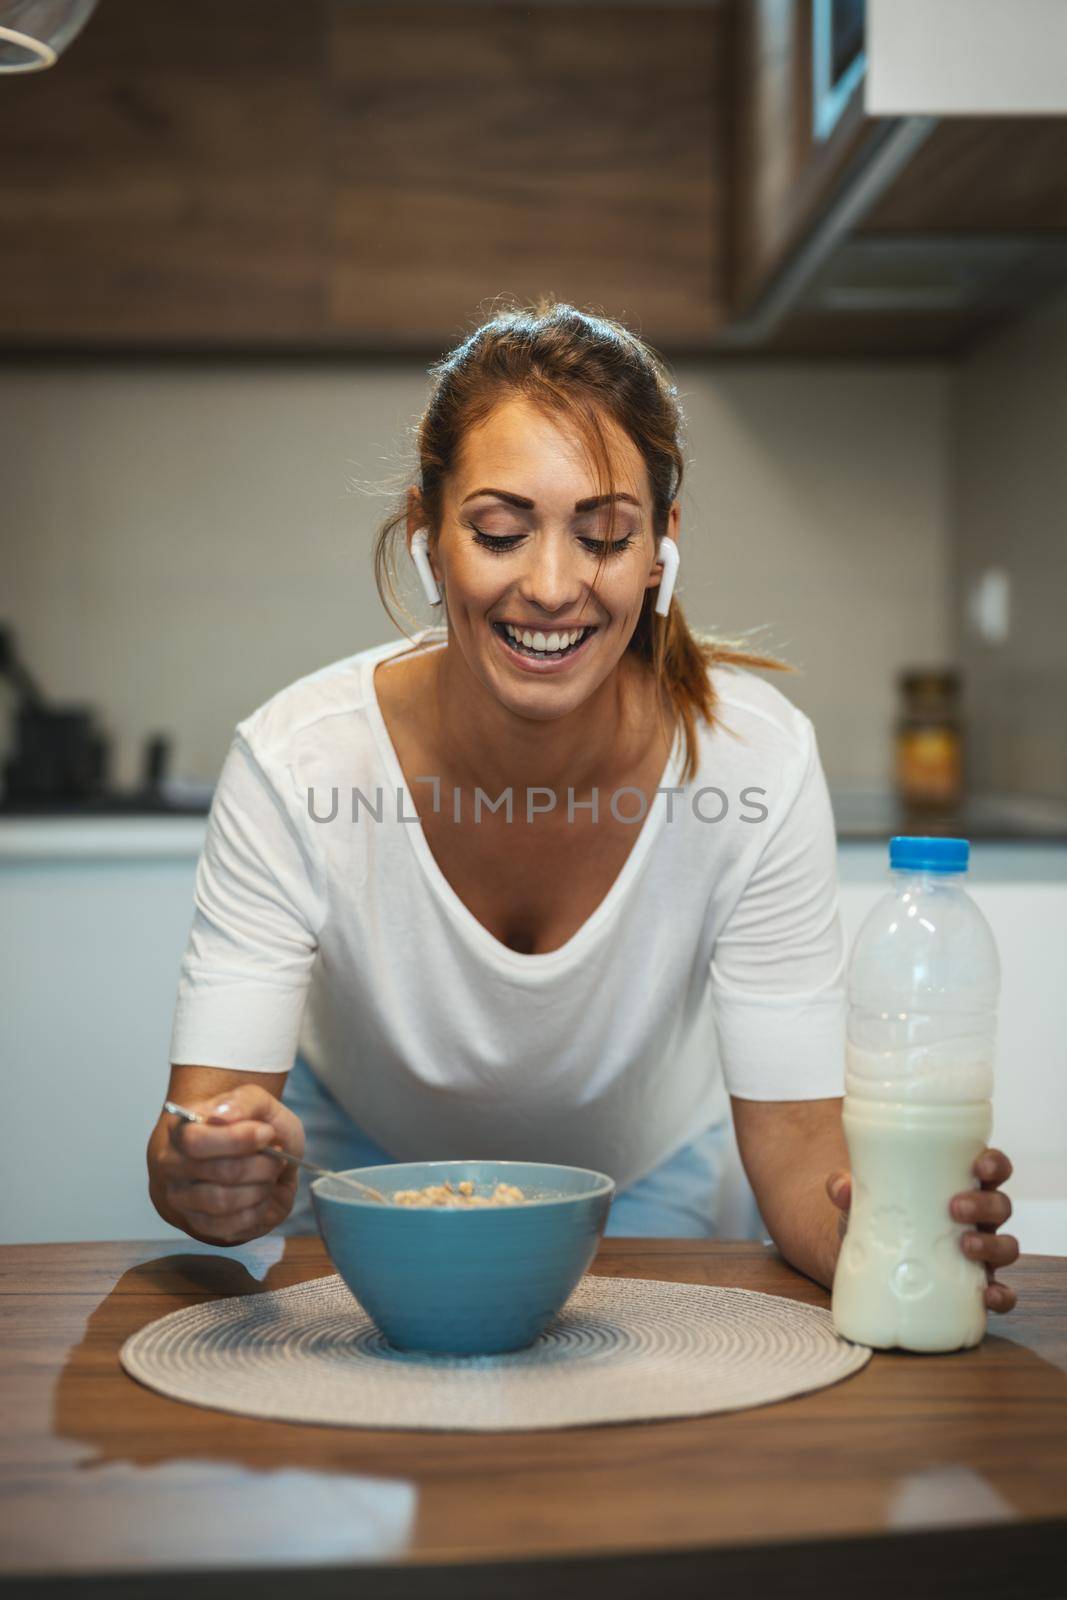 Beautiful young smiling woman is preparing her healthy breakfast in her kitchen.